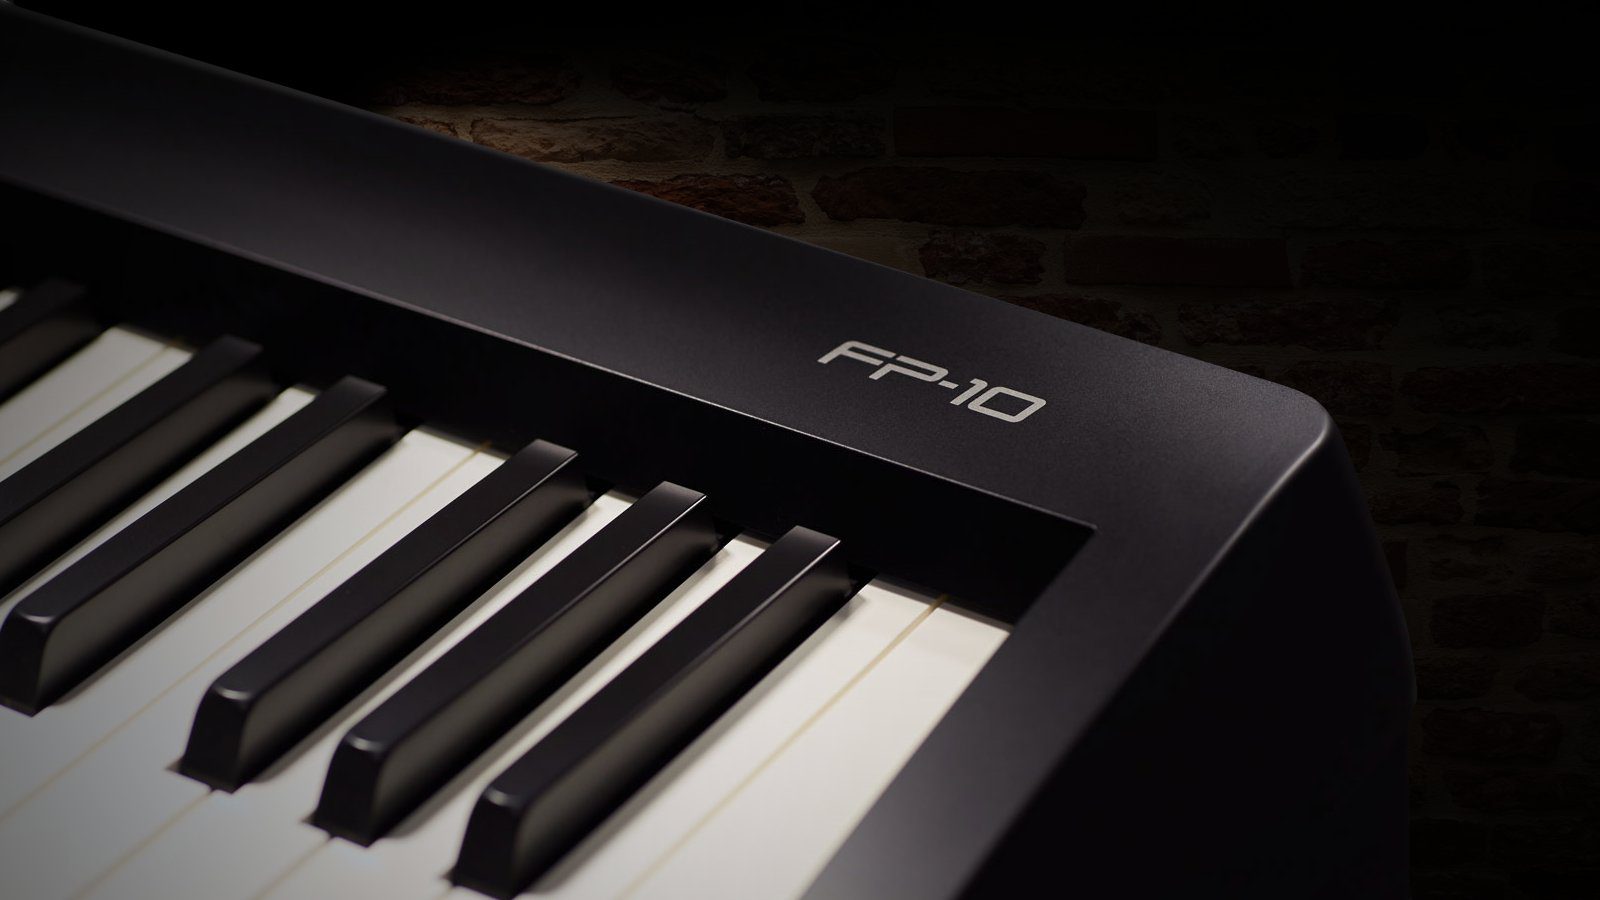 Product Review: Roland FP-10 - Portable Piano